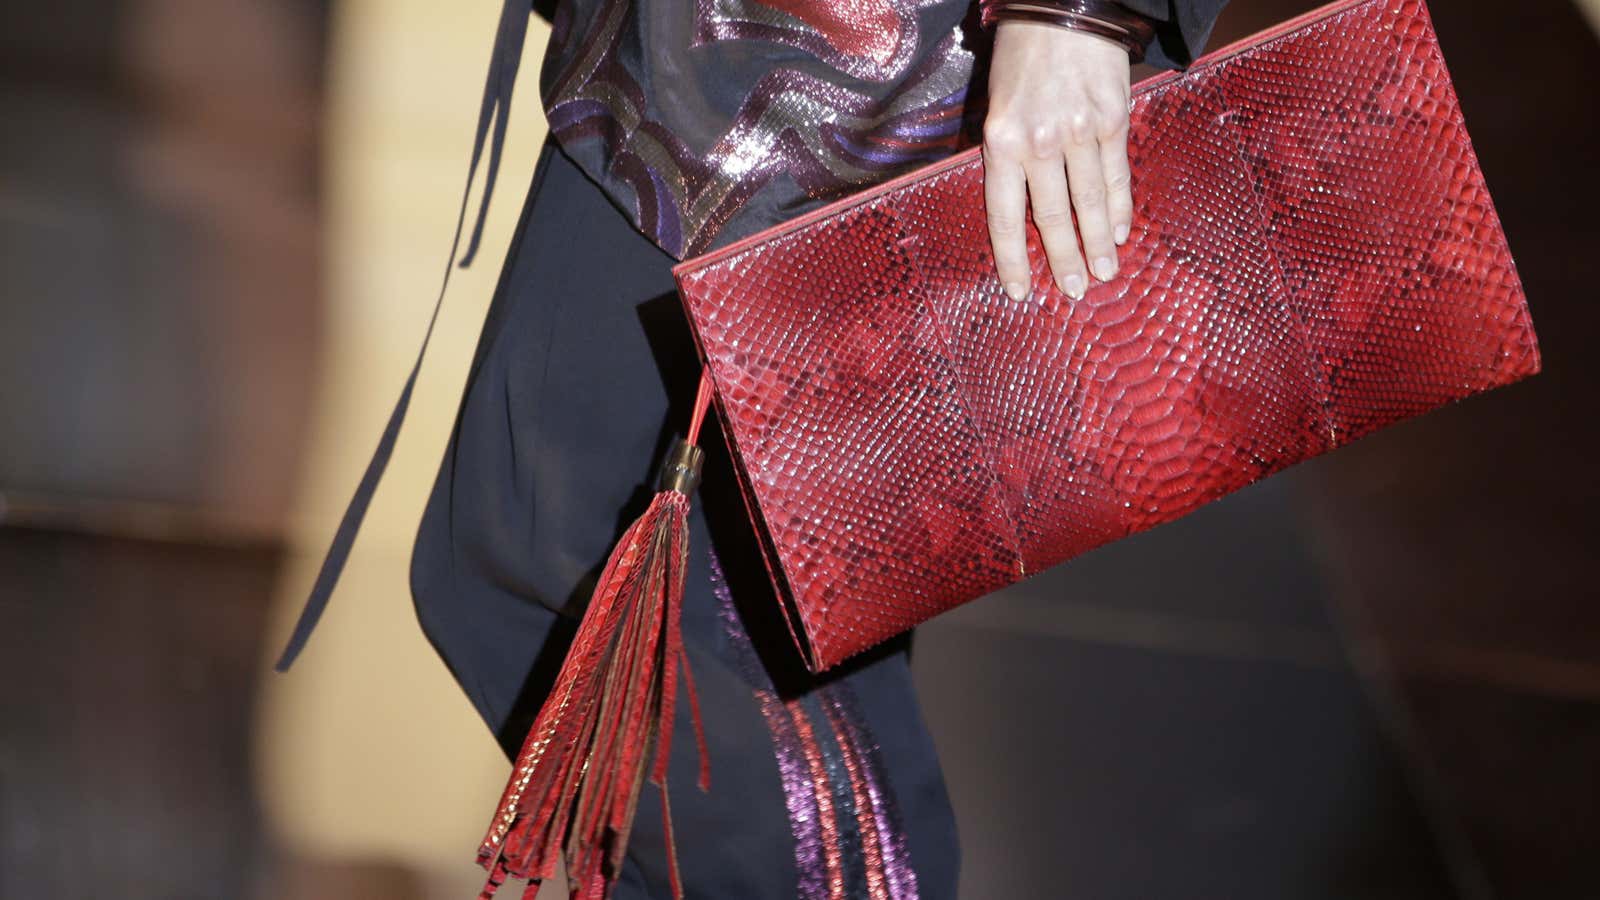 Kering’s warning to counterfeiters of Gucci bags like this one: knock it off with the knockoffs, or else.